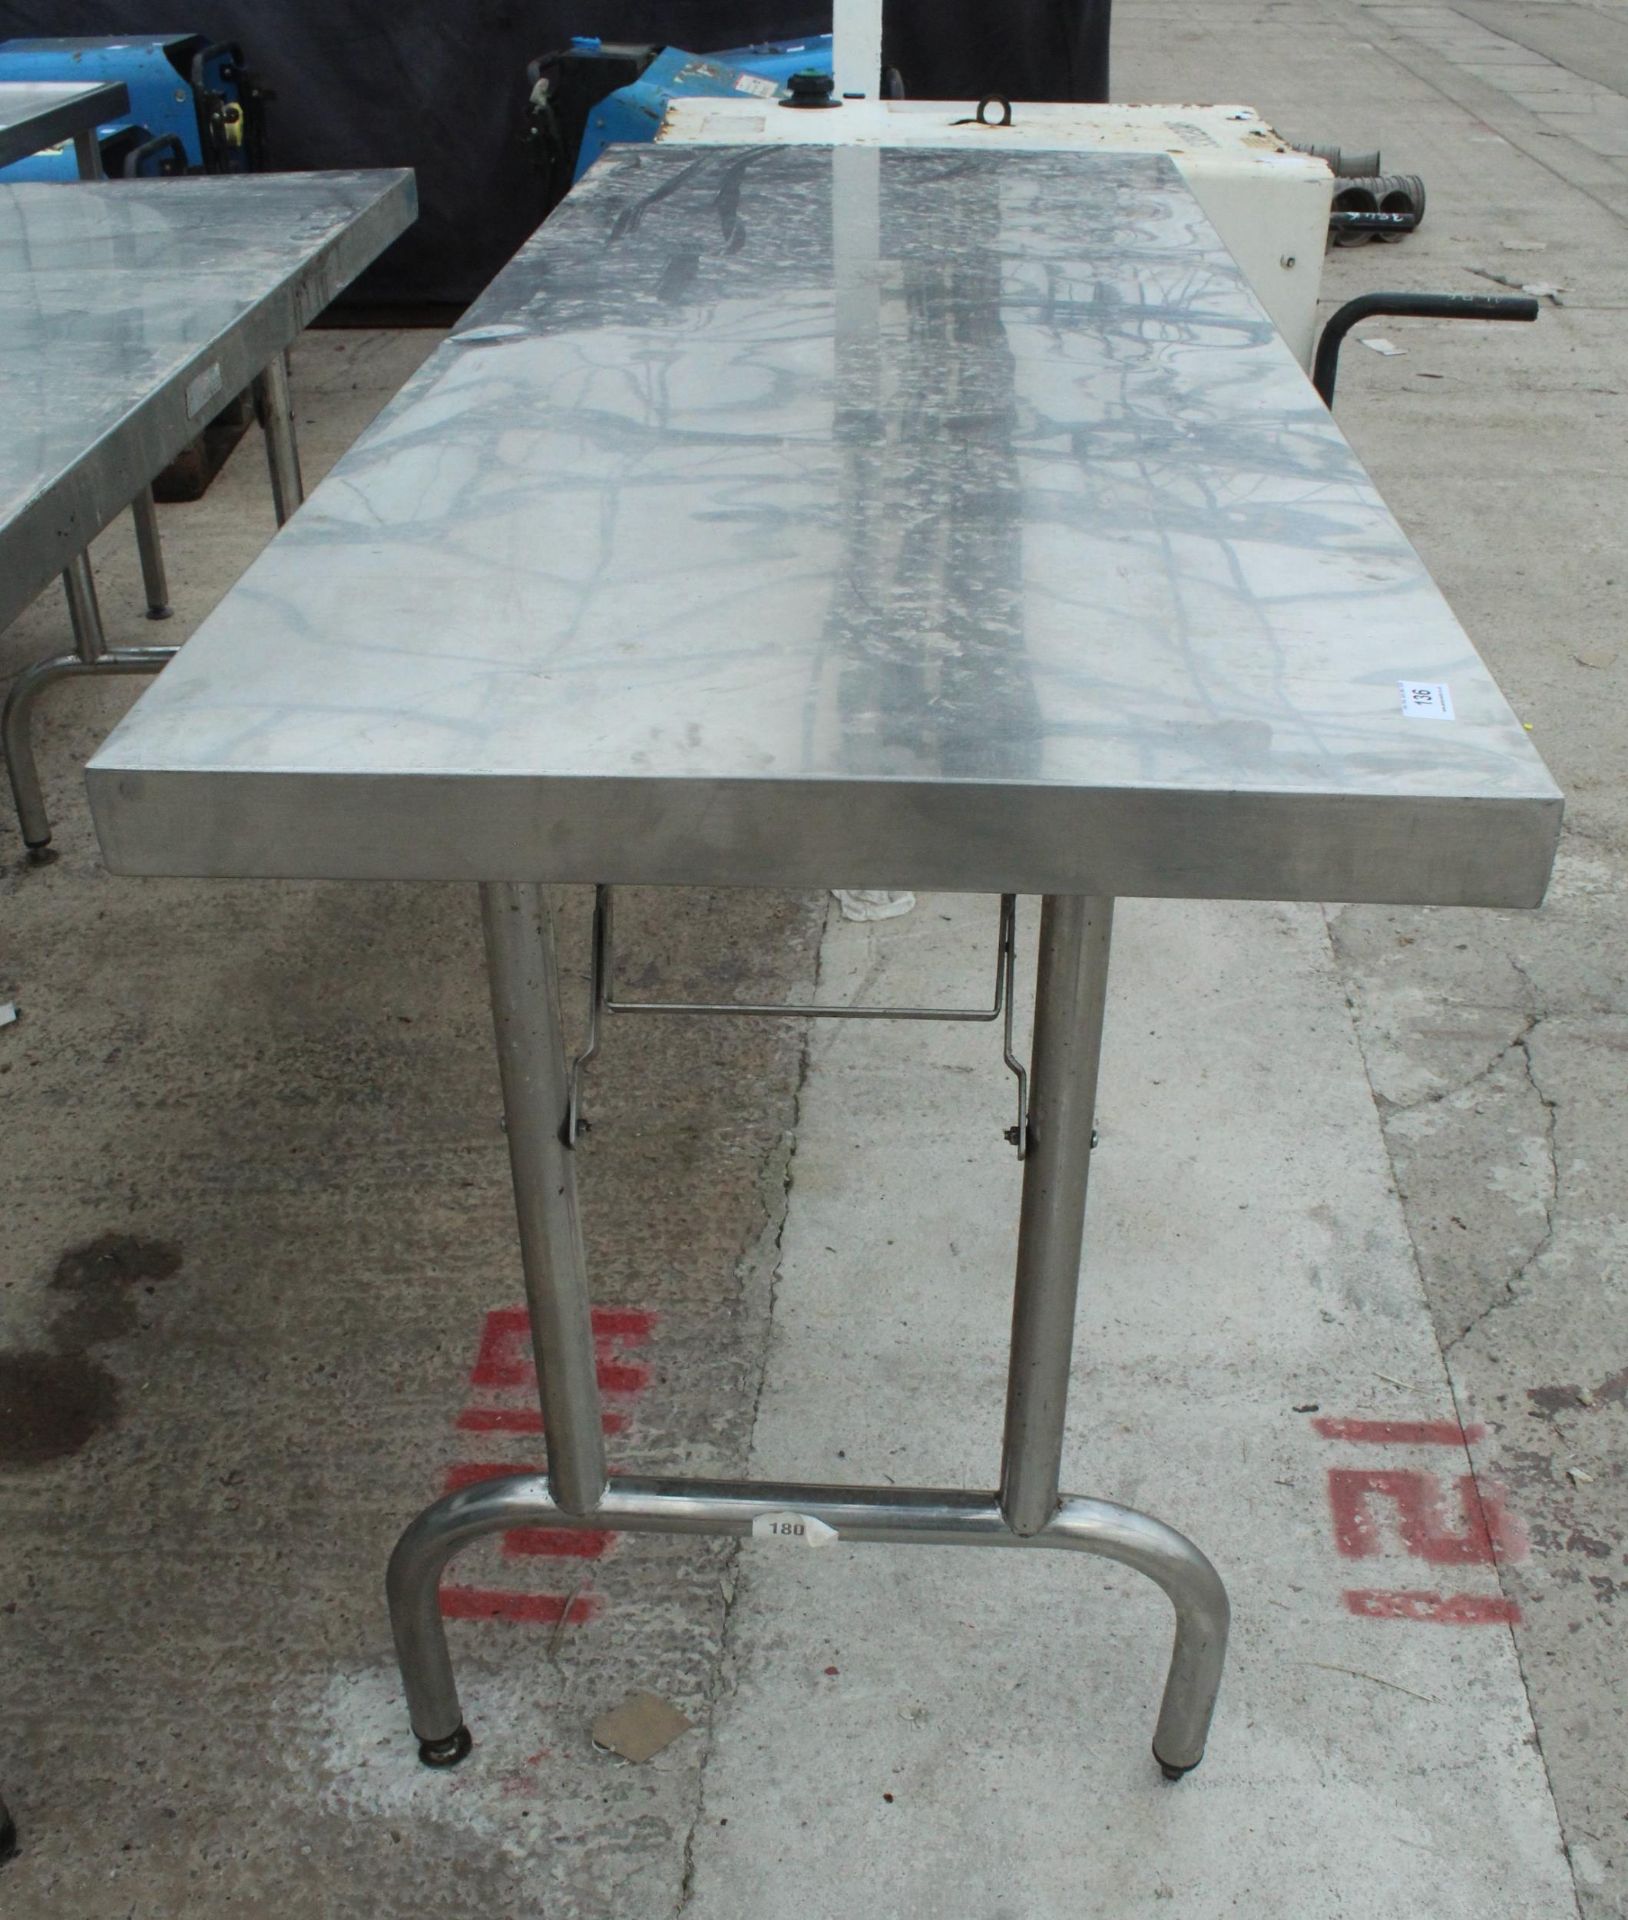 STAINLESS FOLD AWAY CATERING TABLE 71" X 35" + VAT - Image 2 of 2